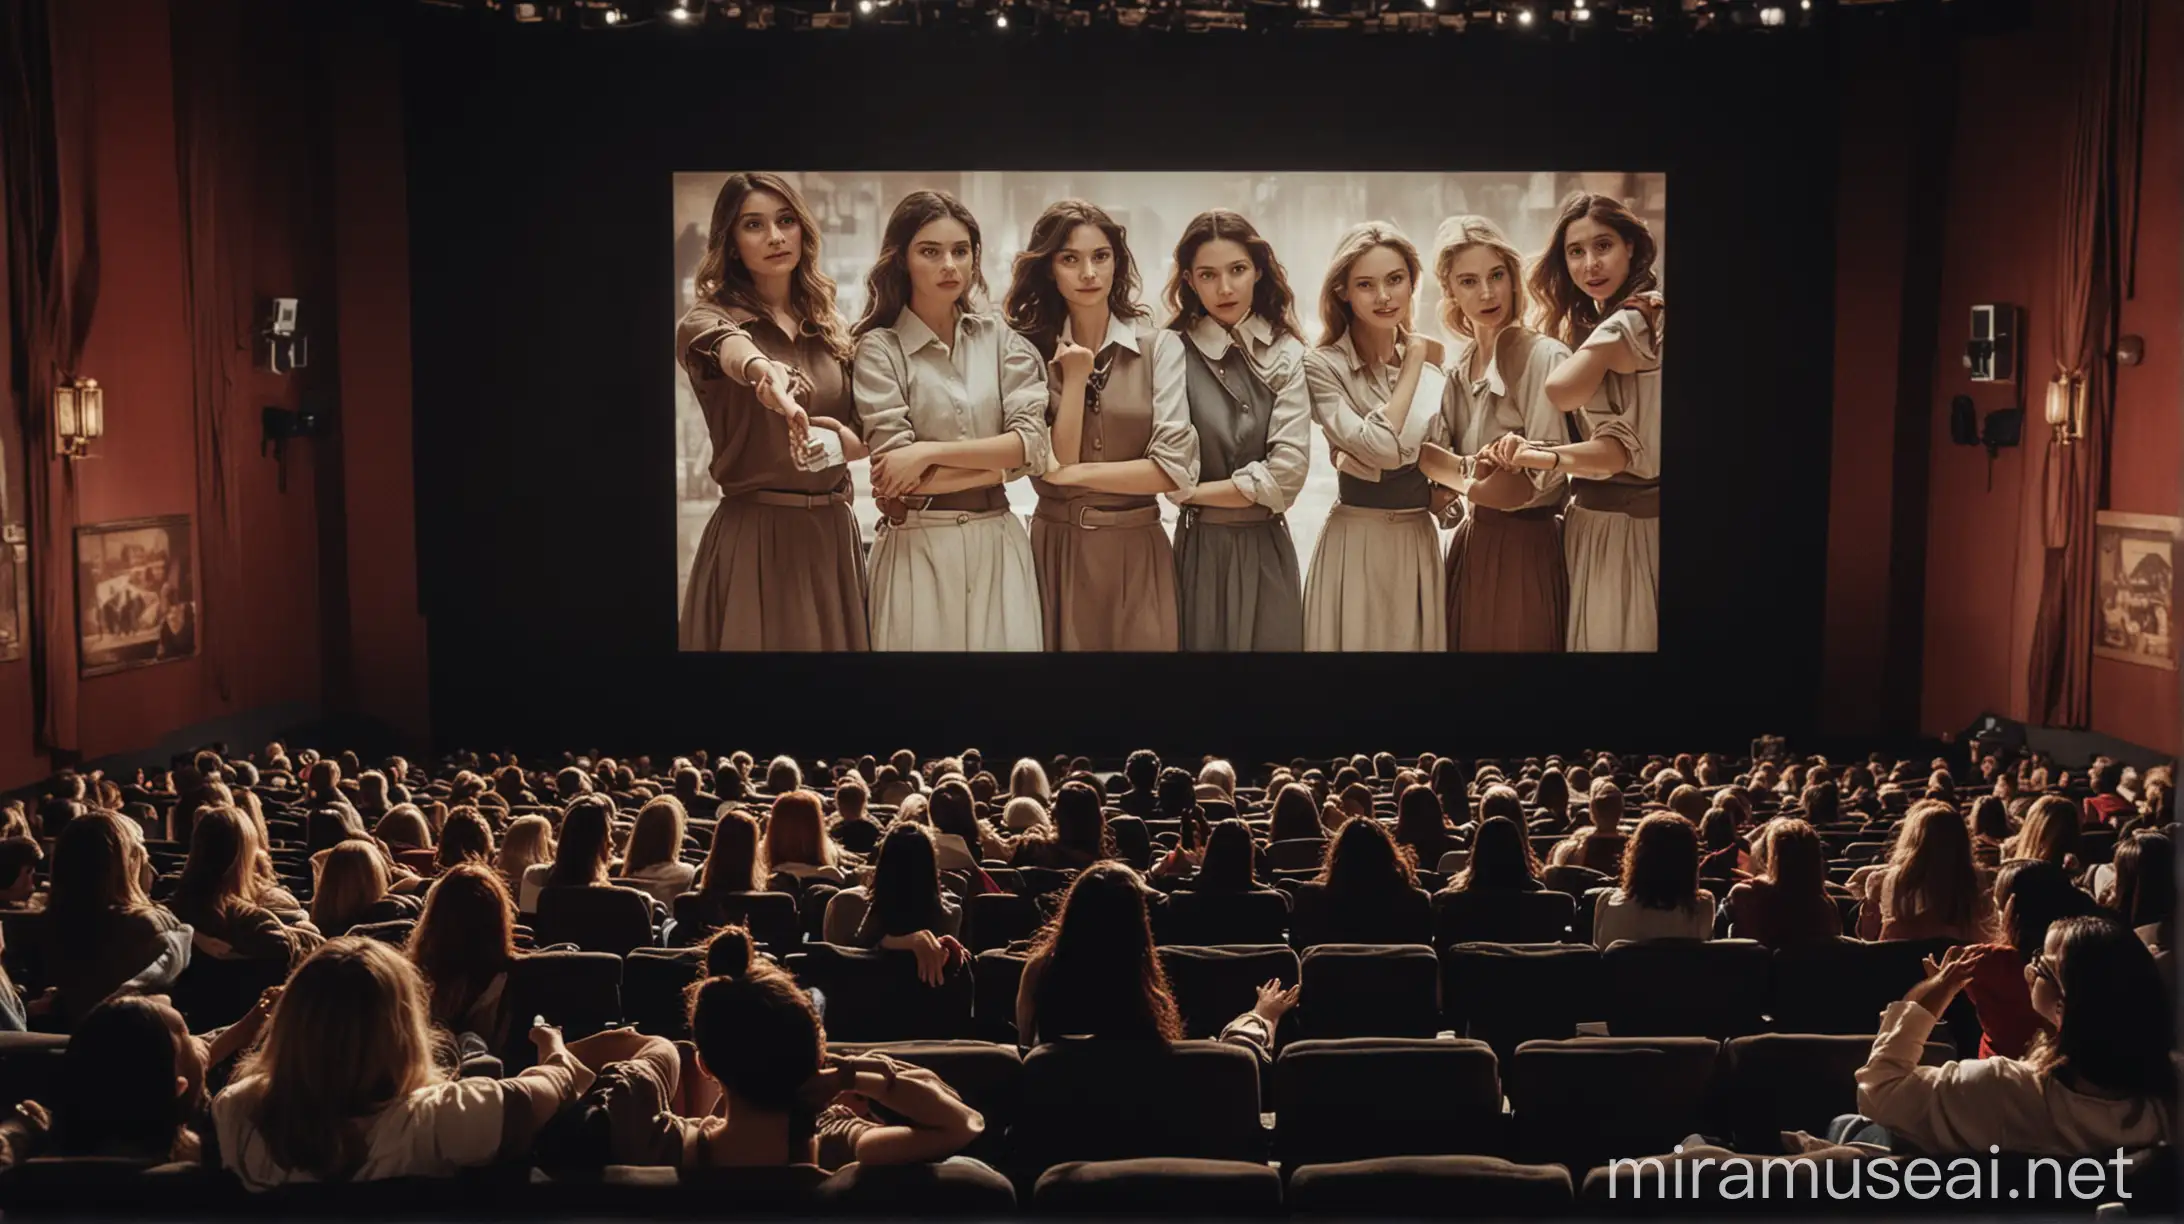 Group of women's watch movie in theatre,theater screen center in photo  ,background, full photo of movie screen 